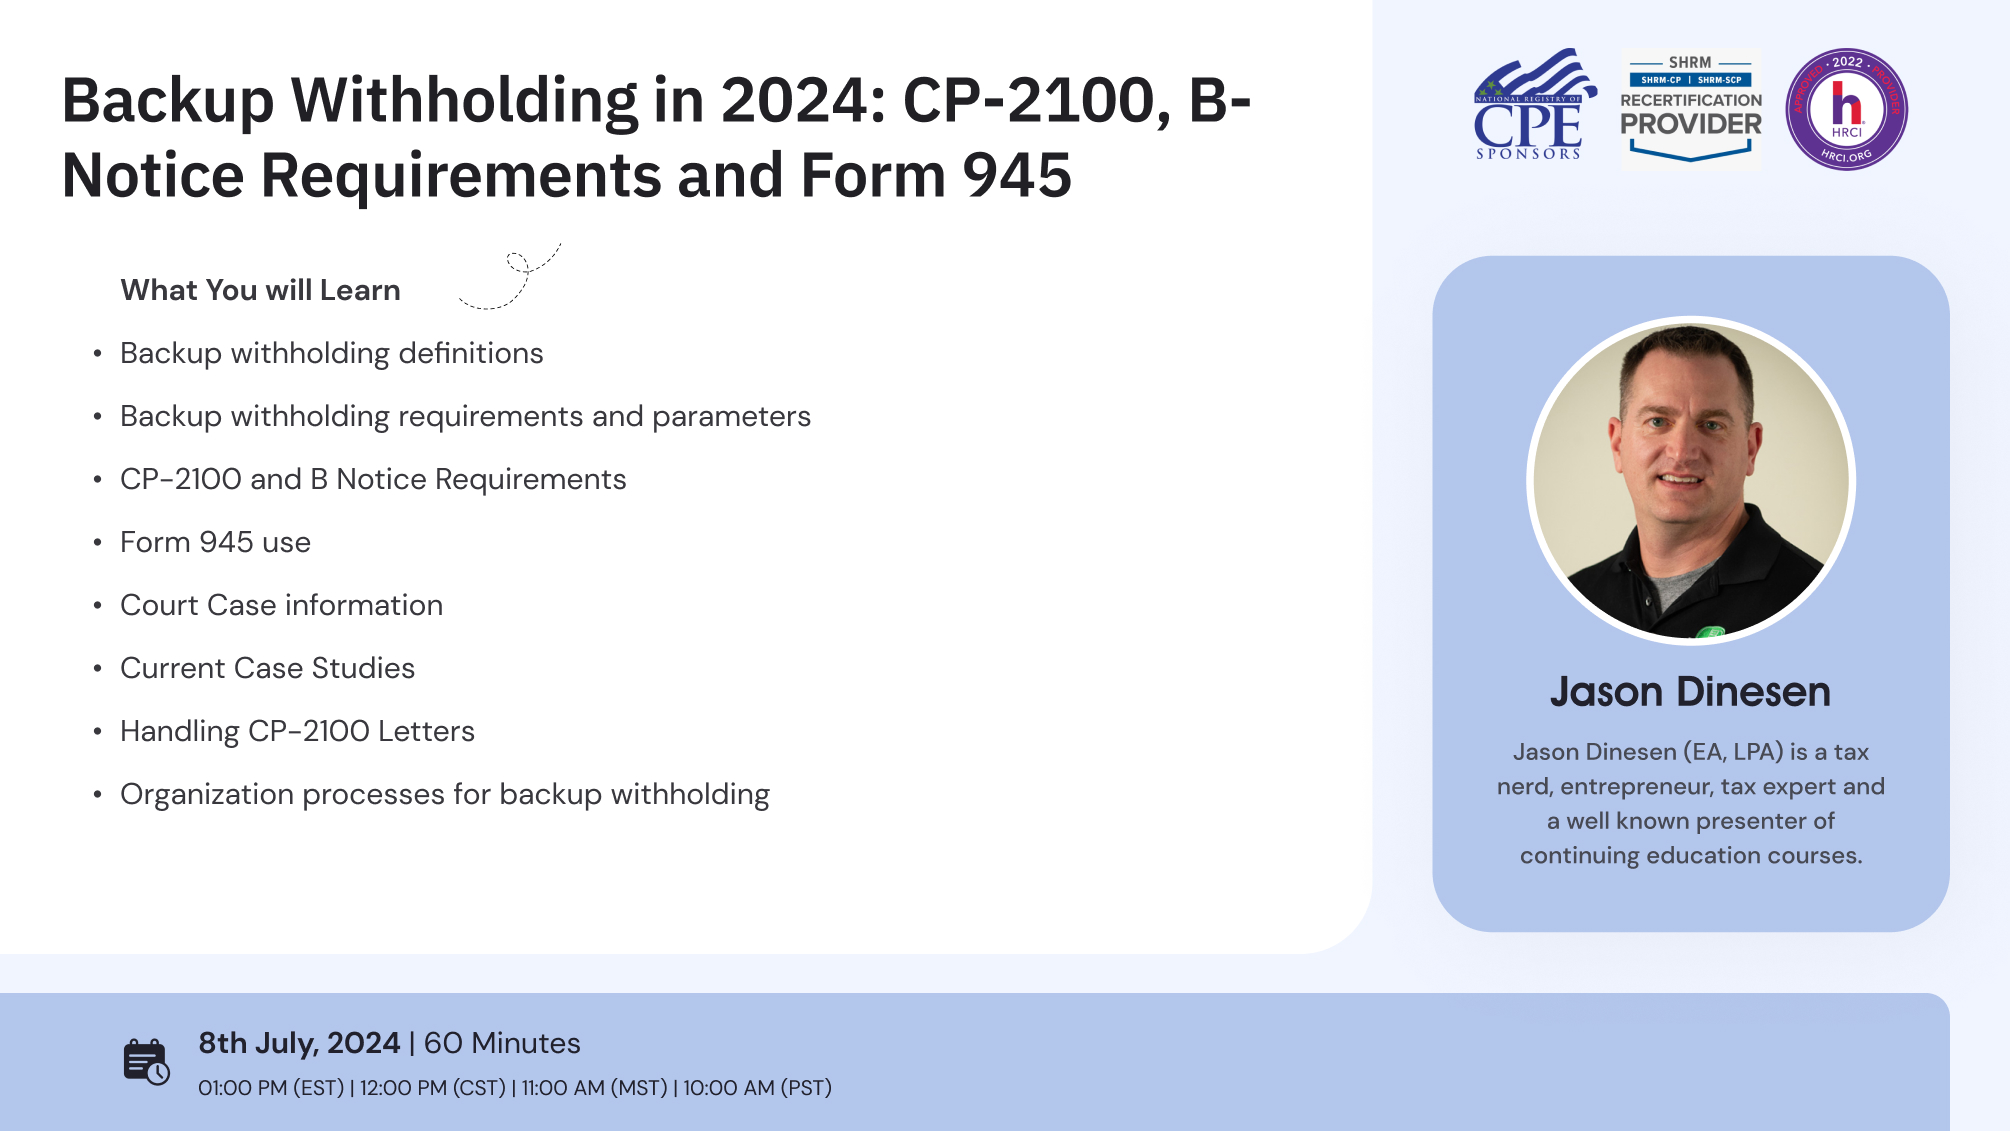 Backup Withholding in 2024: CP-2100, B-Notice Requirements and Form 945